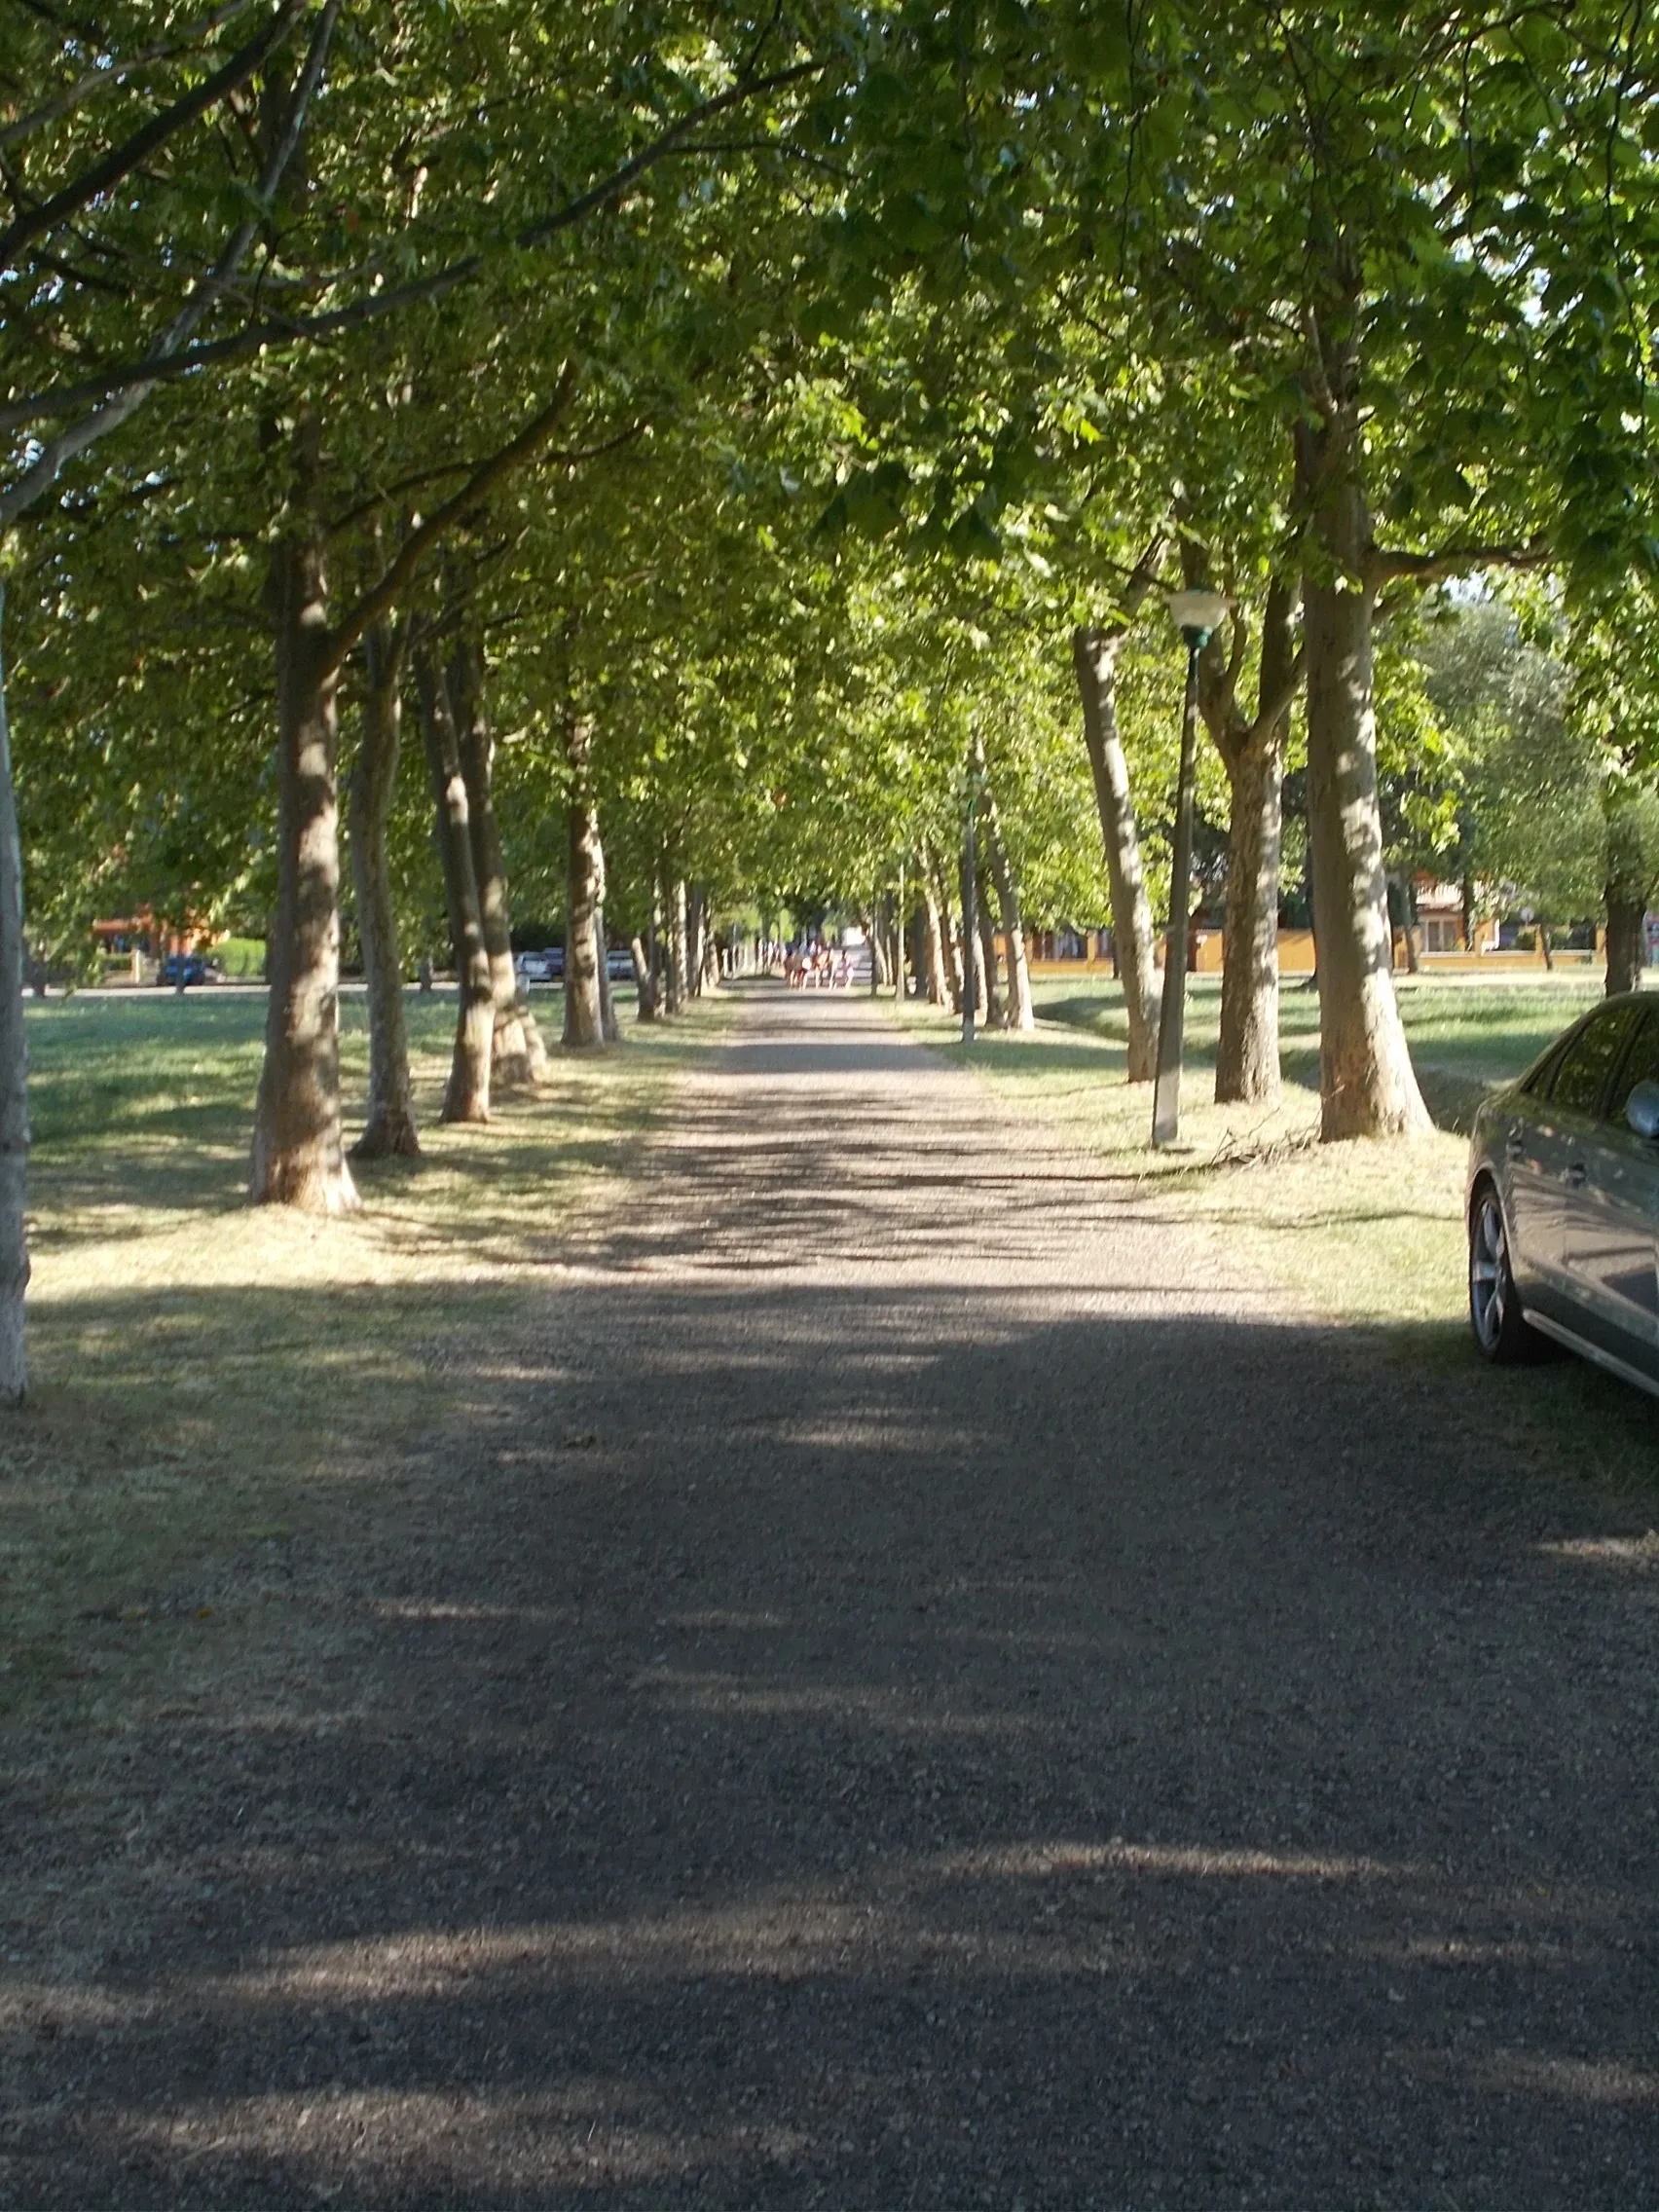 Photo showing: 'Avenue', a tree-lined, car free road from Margó Ede Promenade, free beach of Zamárdi, Somogy County, Hungary.